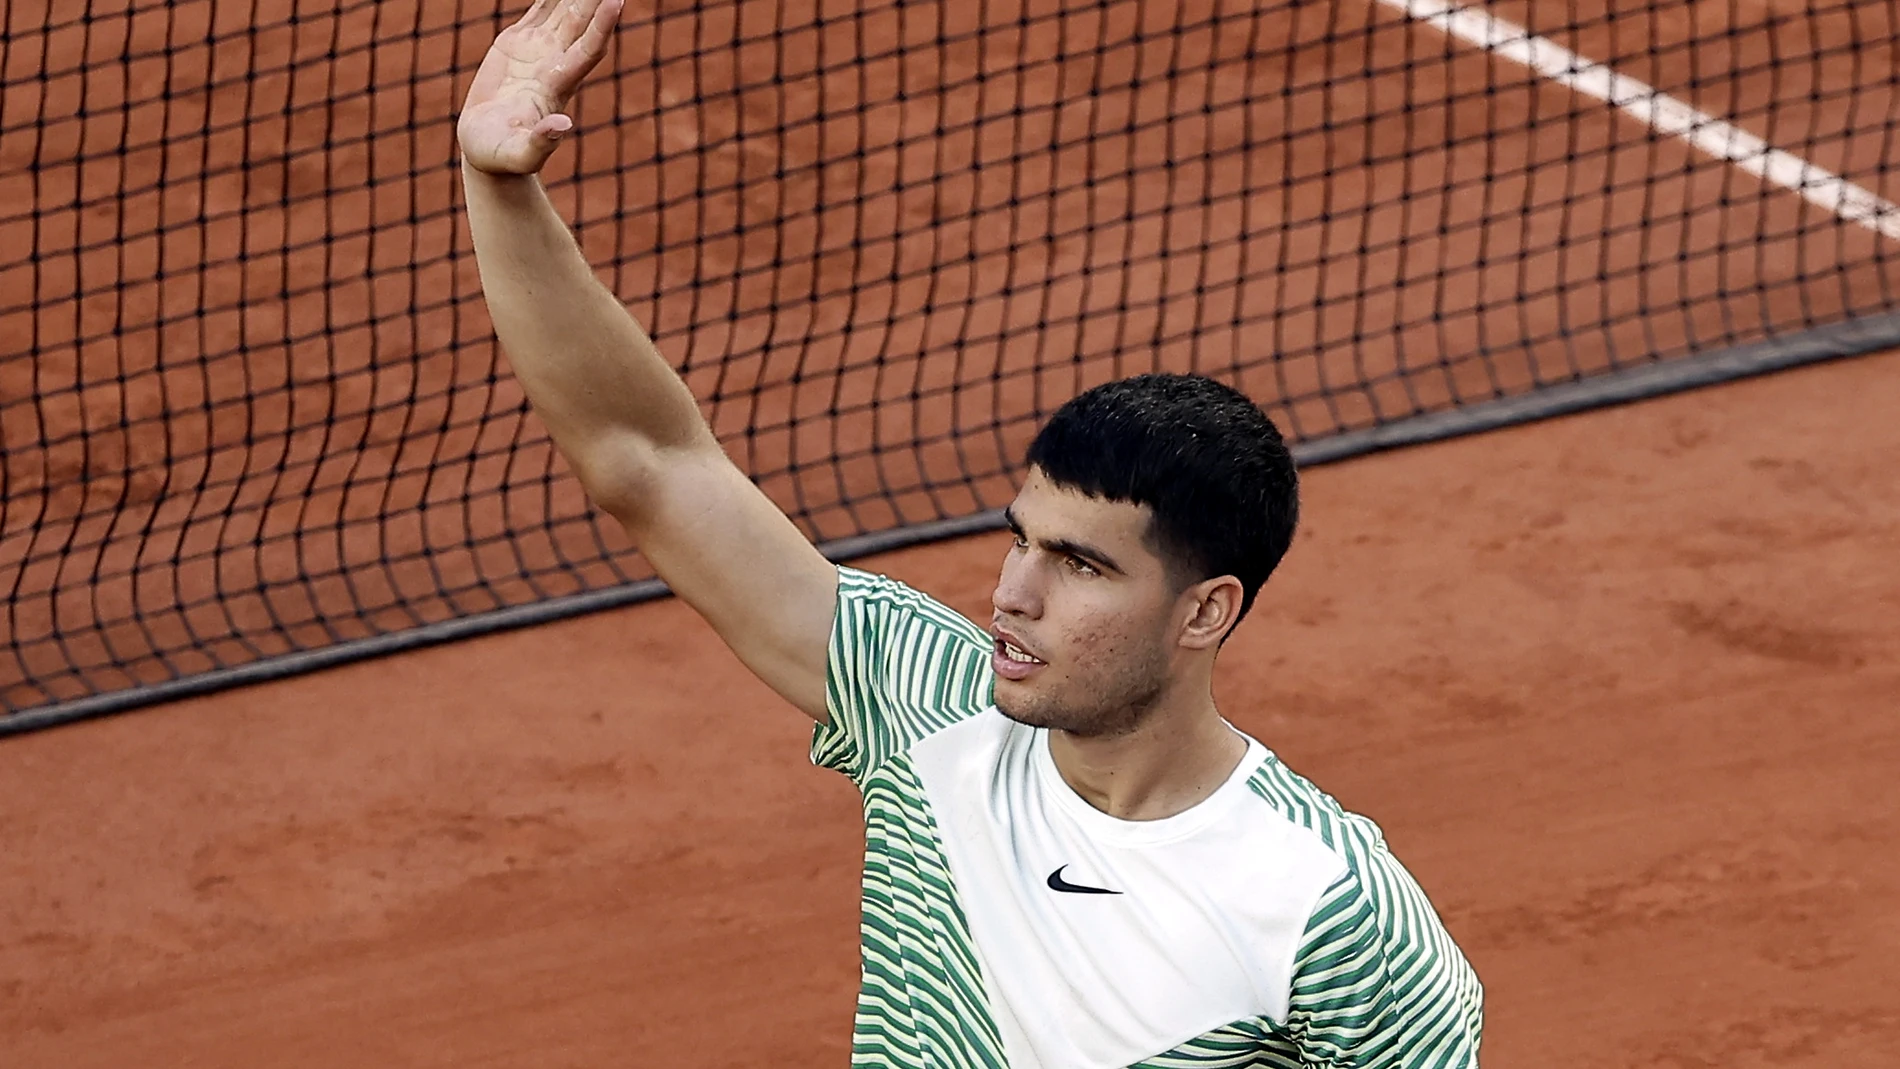 Paris (France), 29/05/2023.- Carlos Alcaraz of Spain reacts after winning against Flavio Cobolli of Italy in their Men's Singles first round match during the French Open Grand Slam tennis tournament at Roland Garros in Paris, France, 29 May 2023. (Tenis, Abierto, Francia, Italia, España) EFE/EPA/CHRISTOPHE PETIT TESSON 